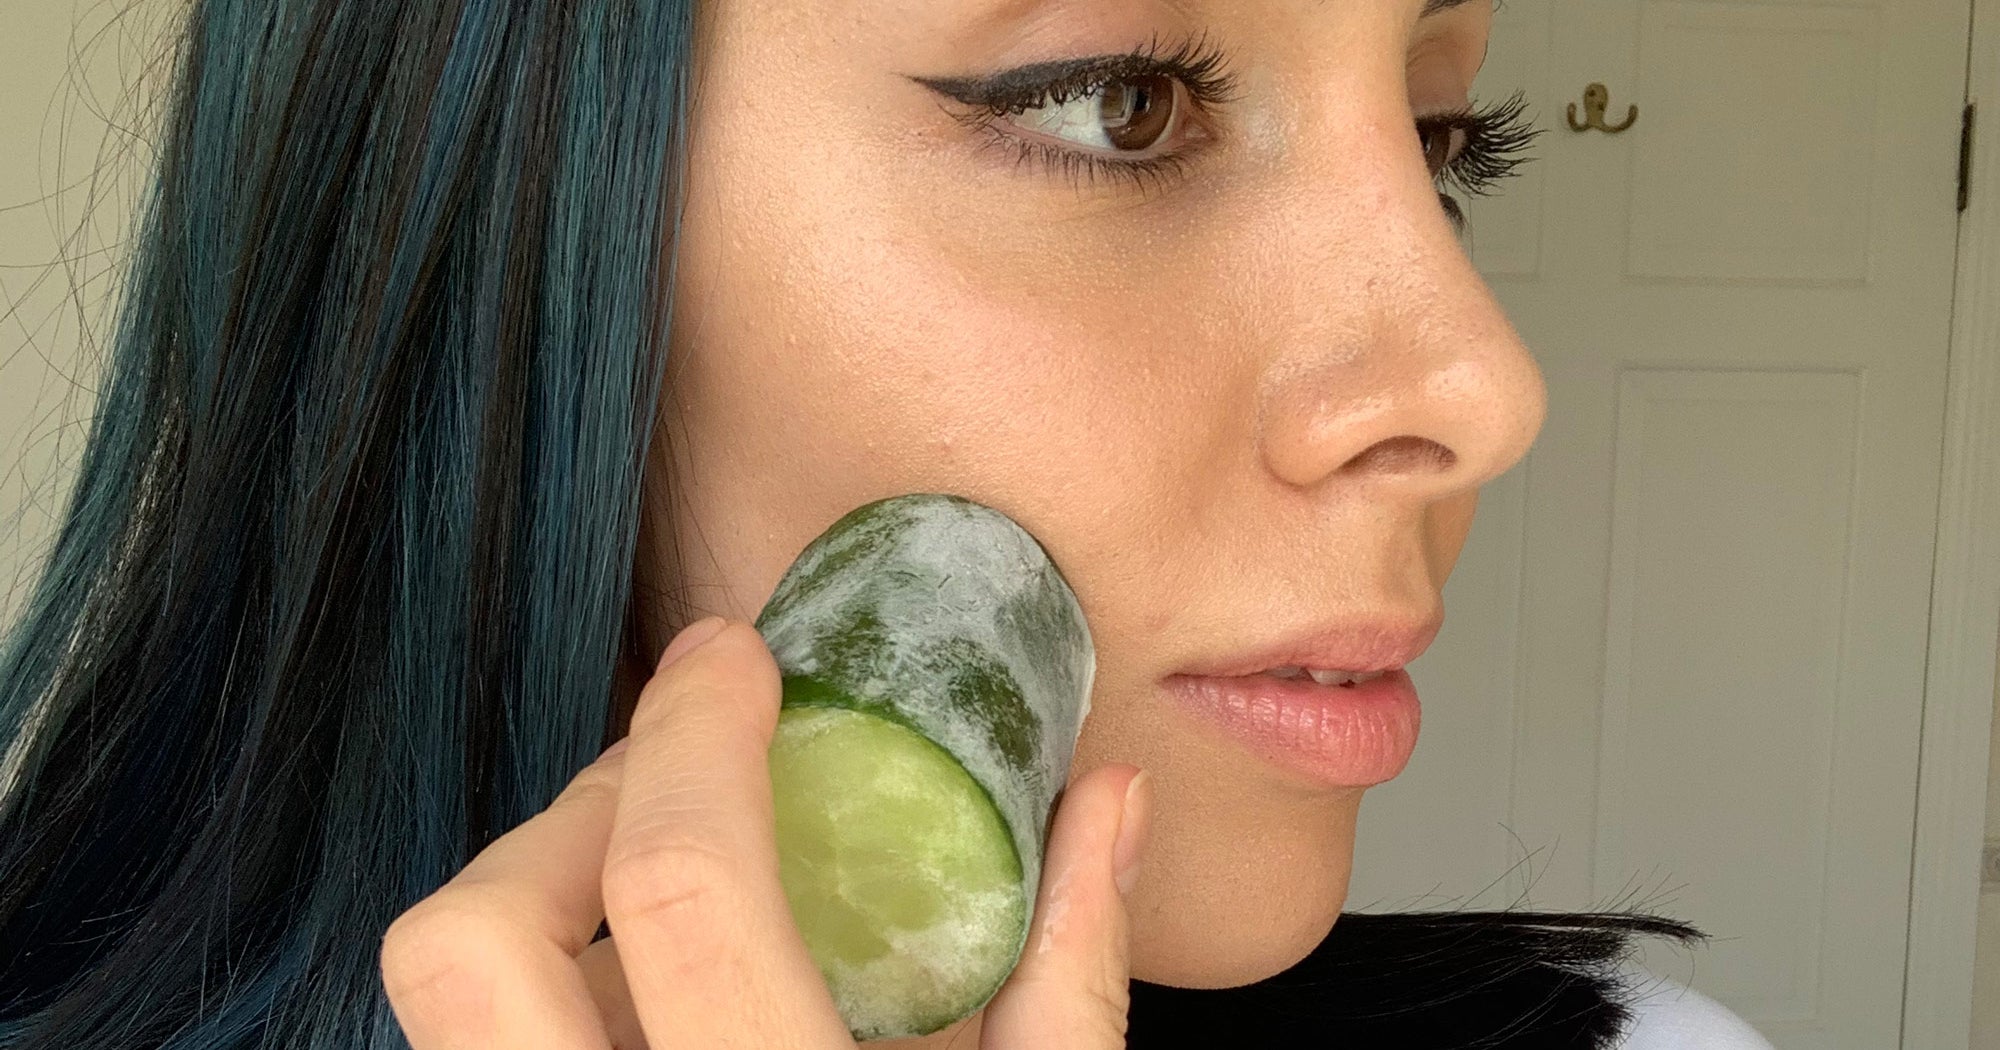 This Frozen Cucumber Hack Is Giving People Amazing Skin